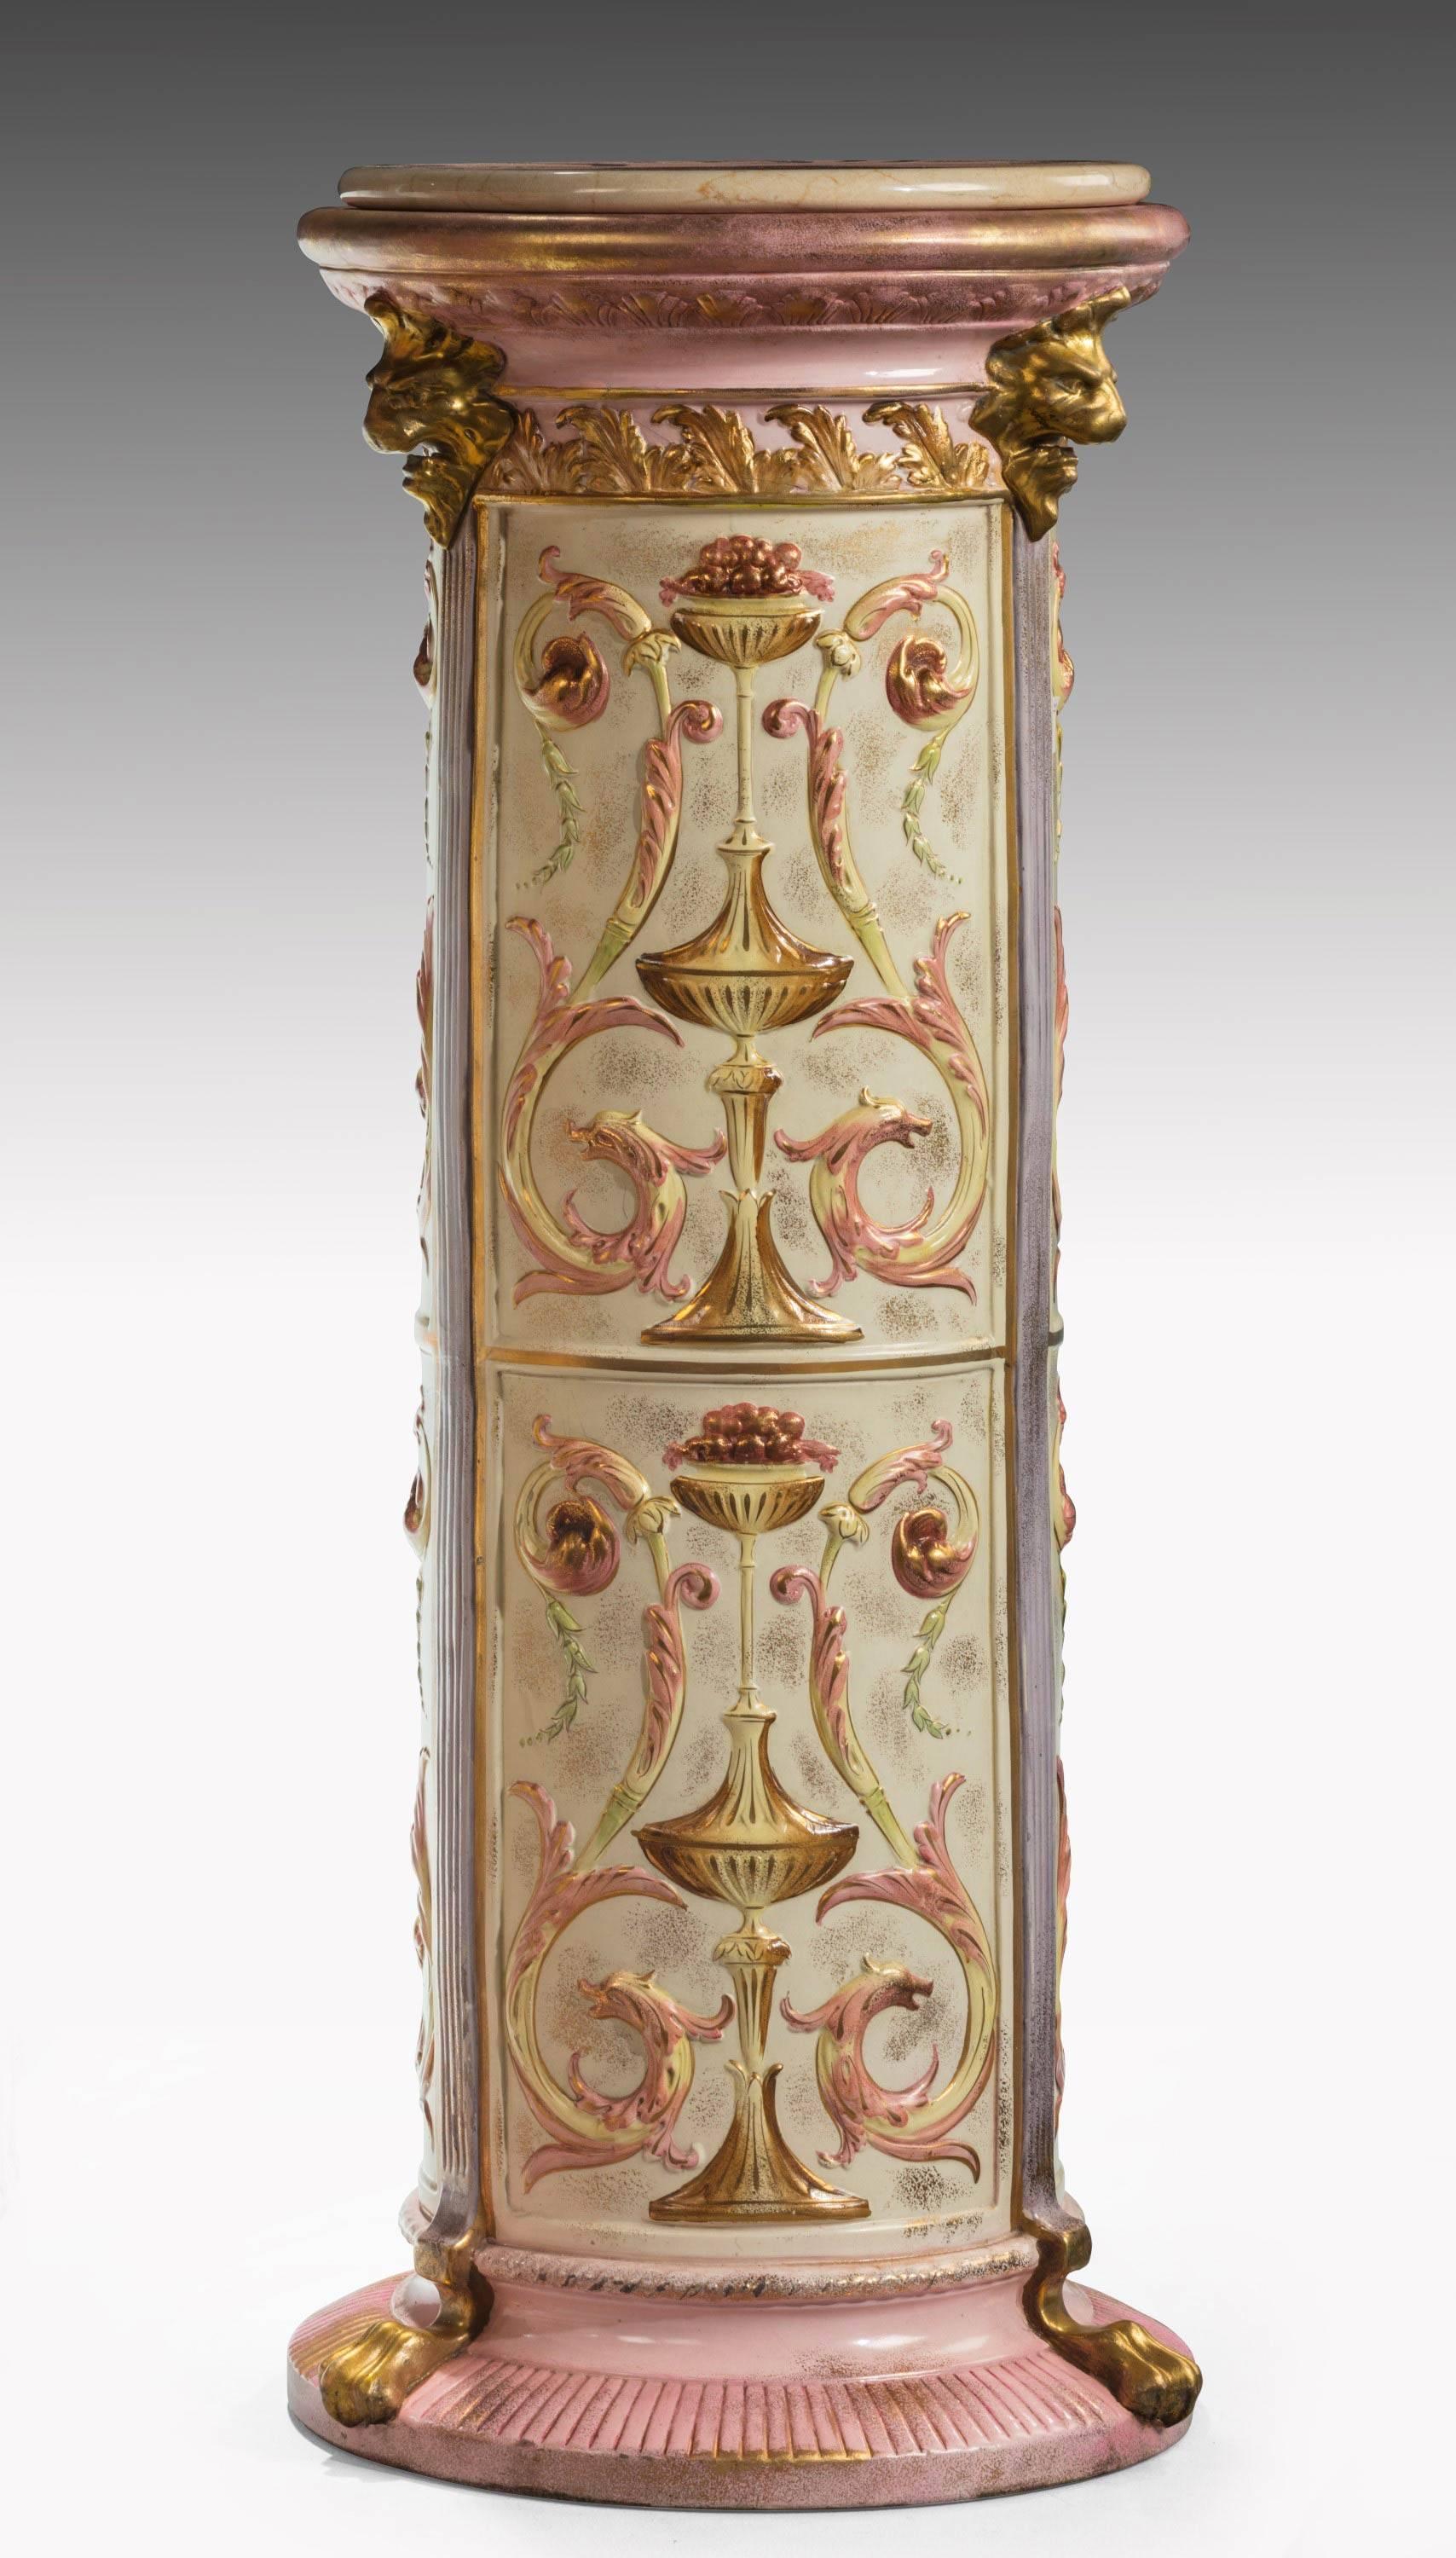 English Pair of 19th Century Pottery Columns with Scroll and Neoclassic Decoration